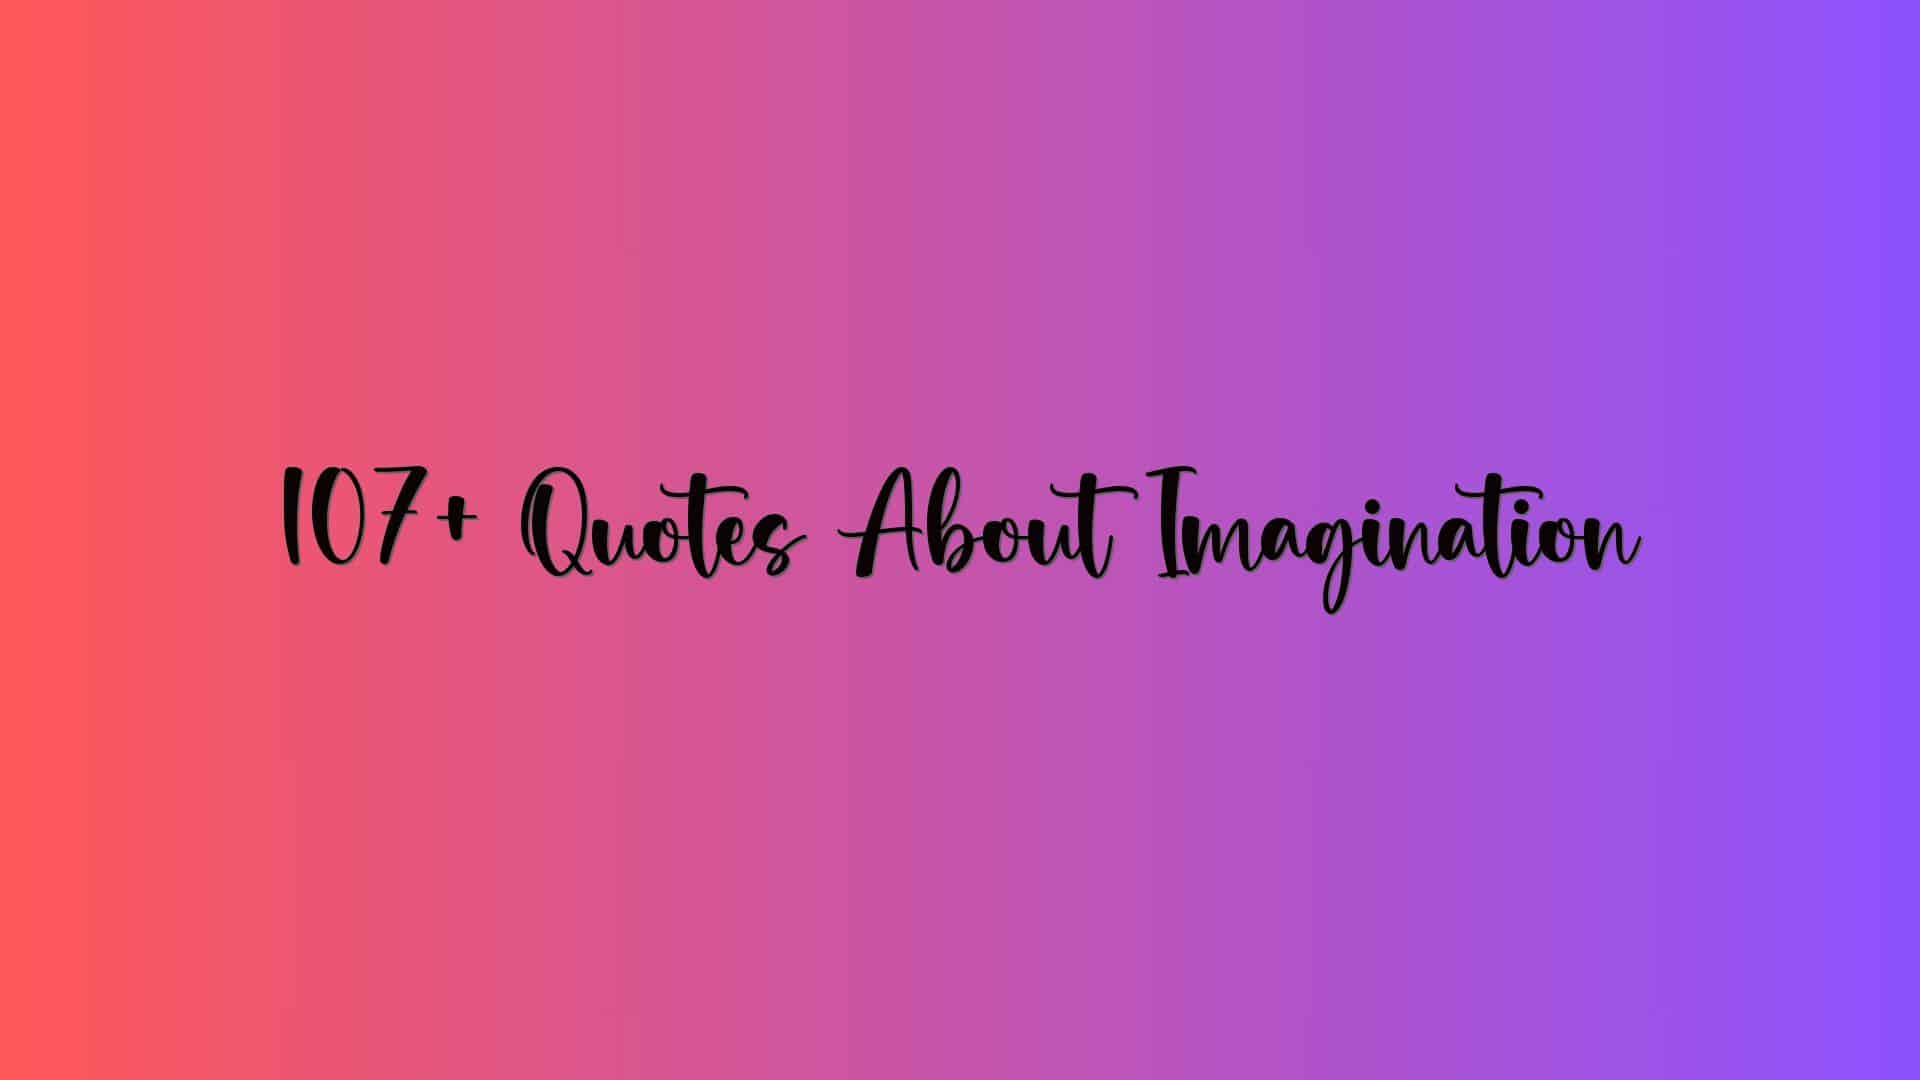 107+ Quotes About Imagination